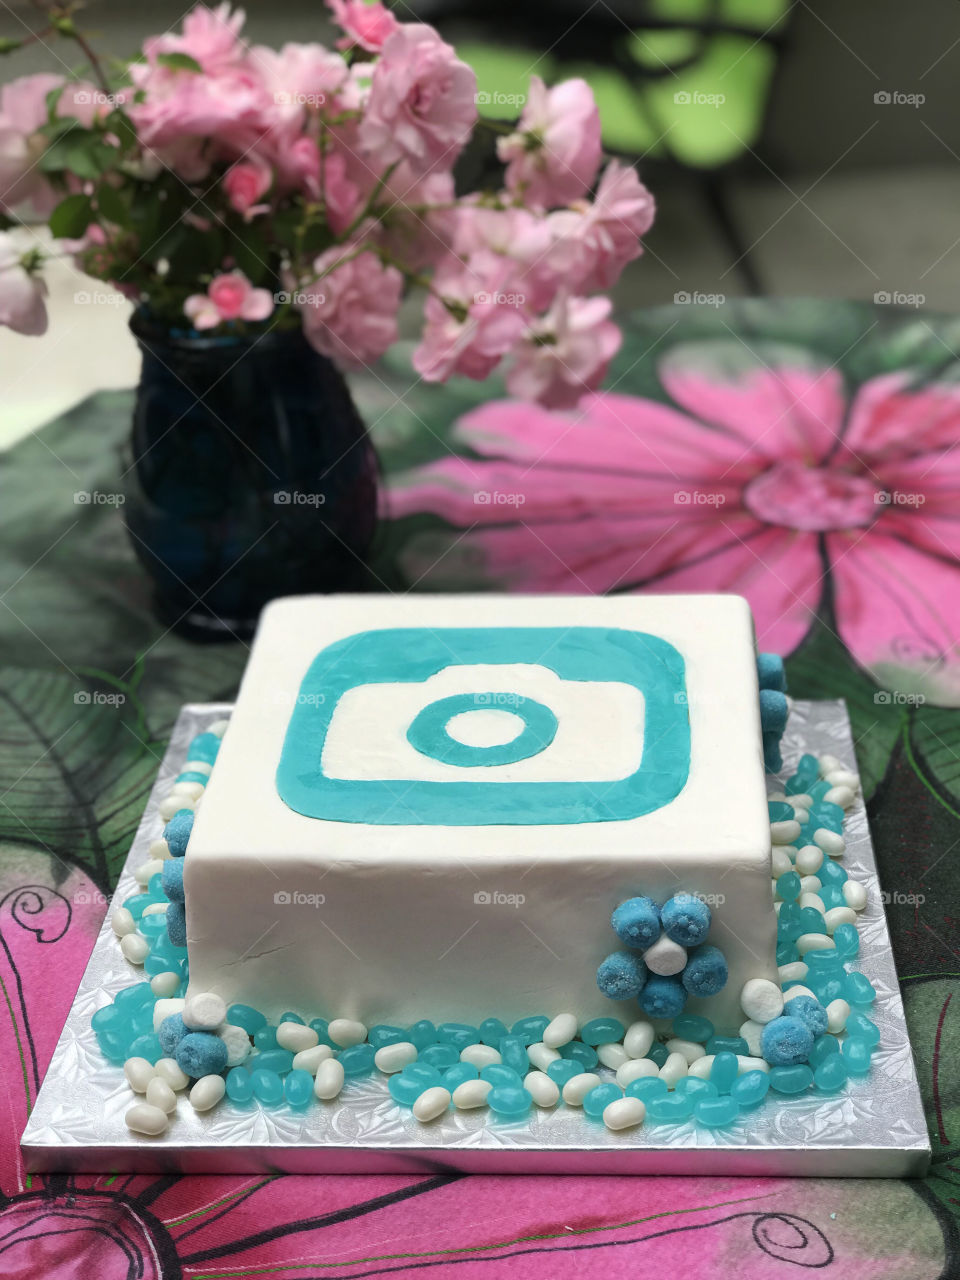 A foap wedding cake with the logo made of white & turquoise fondant. Daisies of turquoise gummies & marshmallows on the side of the cake & turquoise & white jelly beans on the cake base.  All on a green & pink table cloth with a vase of pink roses. 